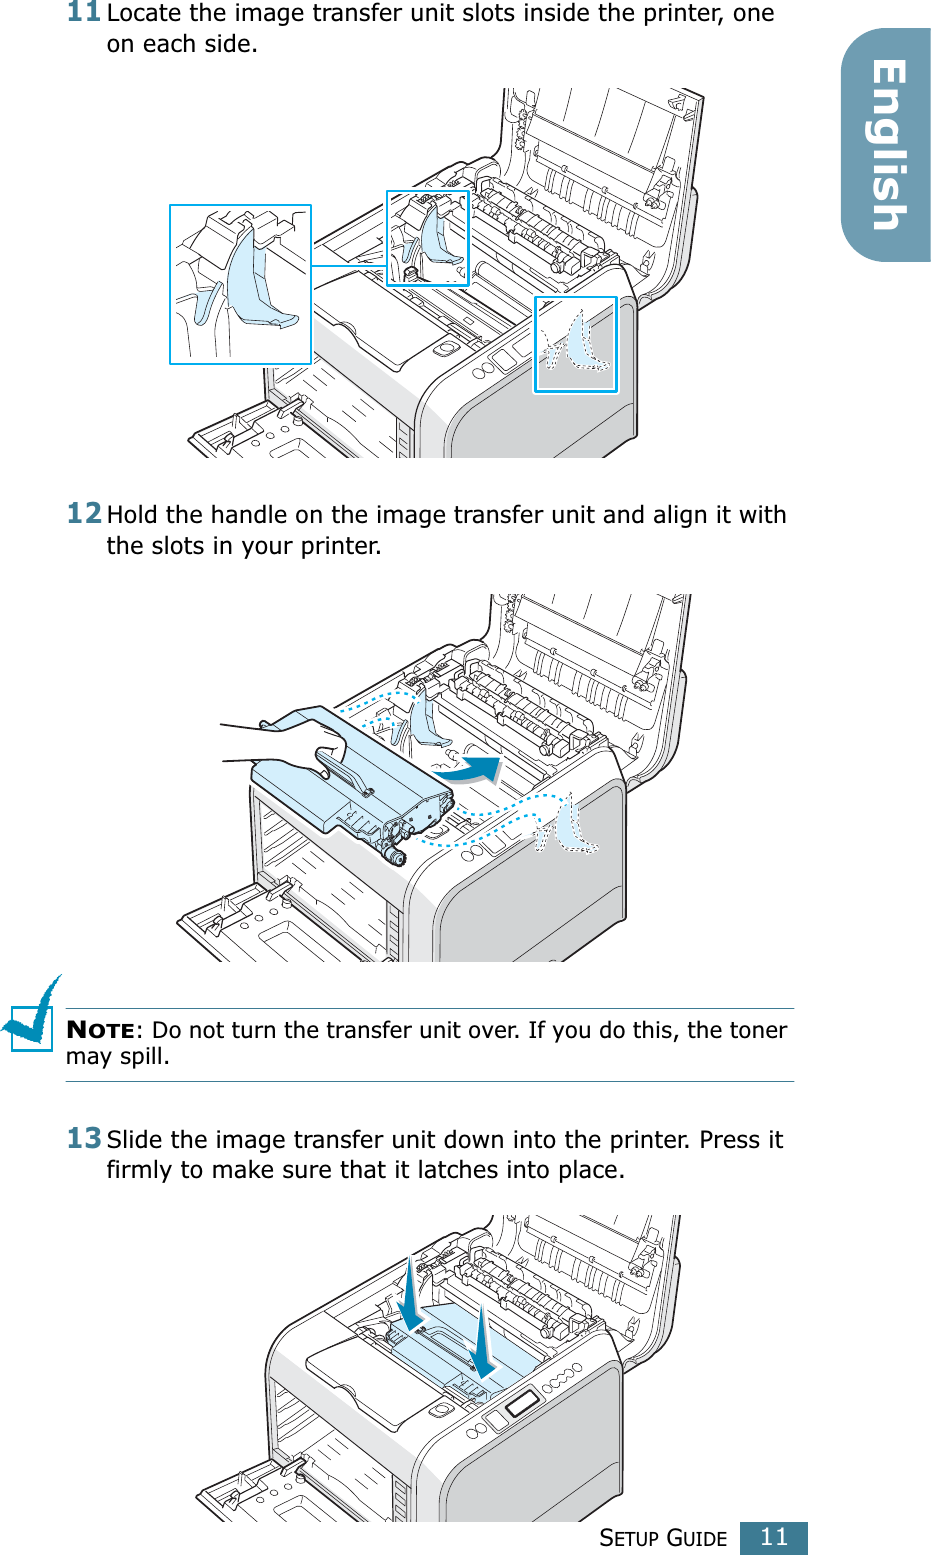 SETUP GUIDE11English11Locate the image transfer unit slots inside the printer, one on each side.12Hold the handle on the image transfer unit and align it with the slots in your printer.NOTE: Do not turn the transfer unit over. If you do this, the toner may spill.13Slide the image transfer unit down into the printer. Press it firmly to make sure that it latches into place.